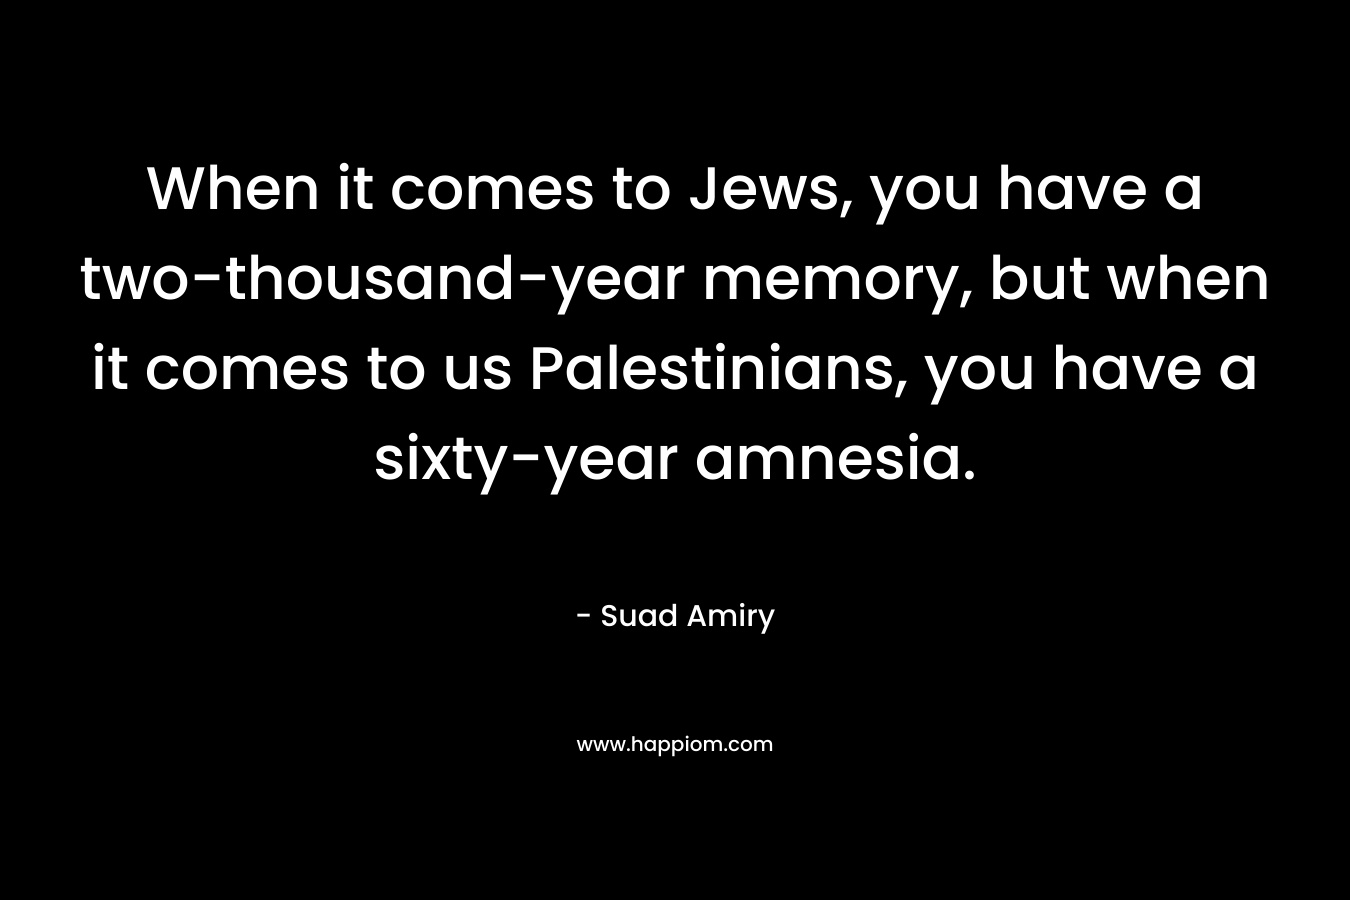 When it comes to Jews, you have a two-thousand-year memory, but when it comes to us Palestinians, you have a sixty-year amnesia.